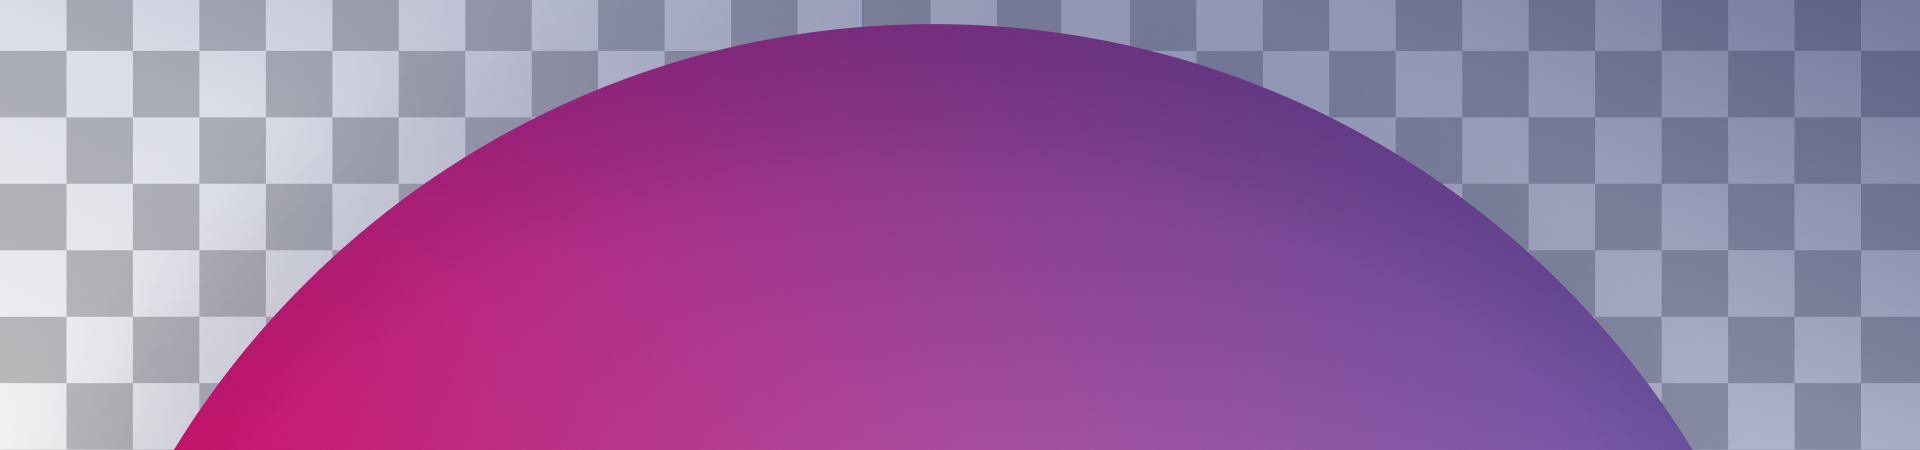 Half circle in pink and purple on a checkerboard background